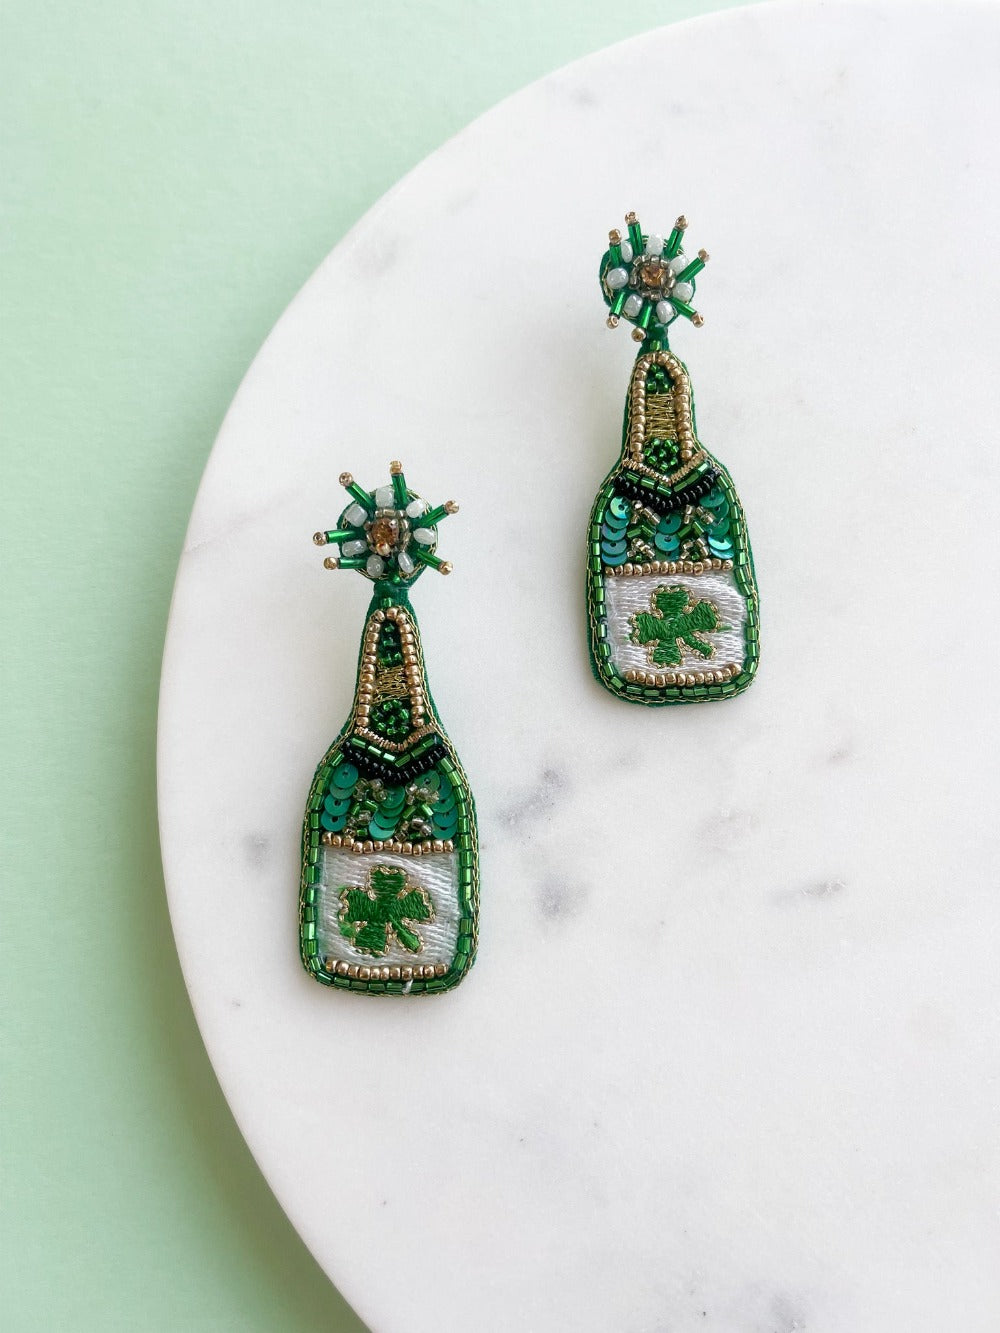 St. Patrick's Day Champagne Clover Earrings | Clover and Bee